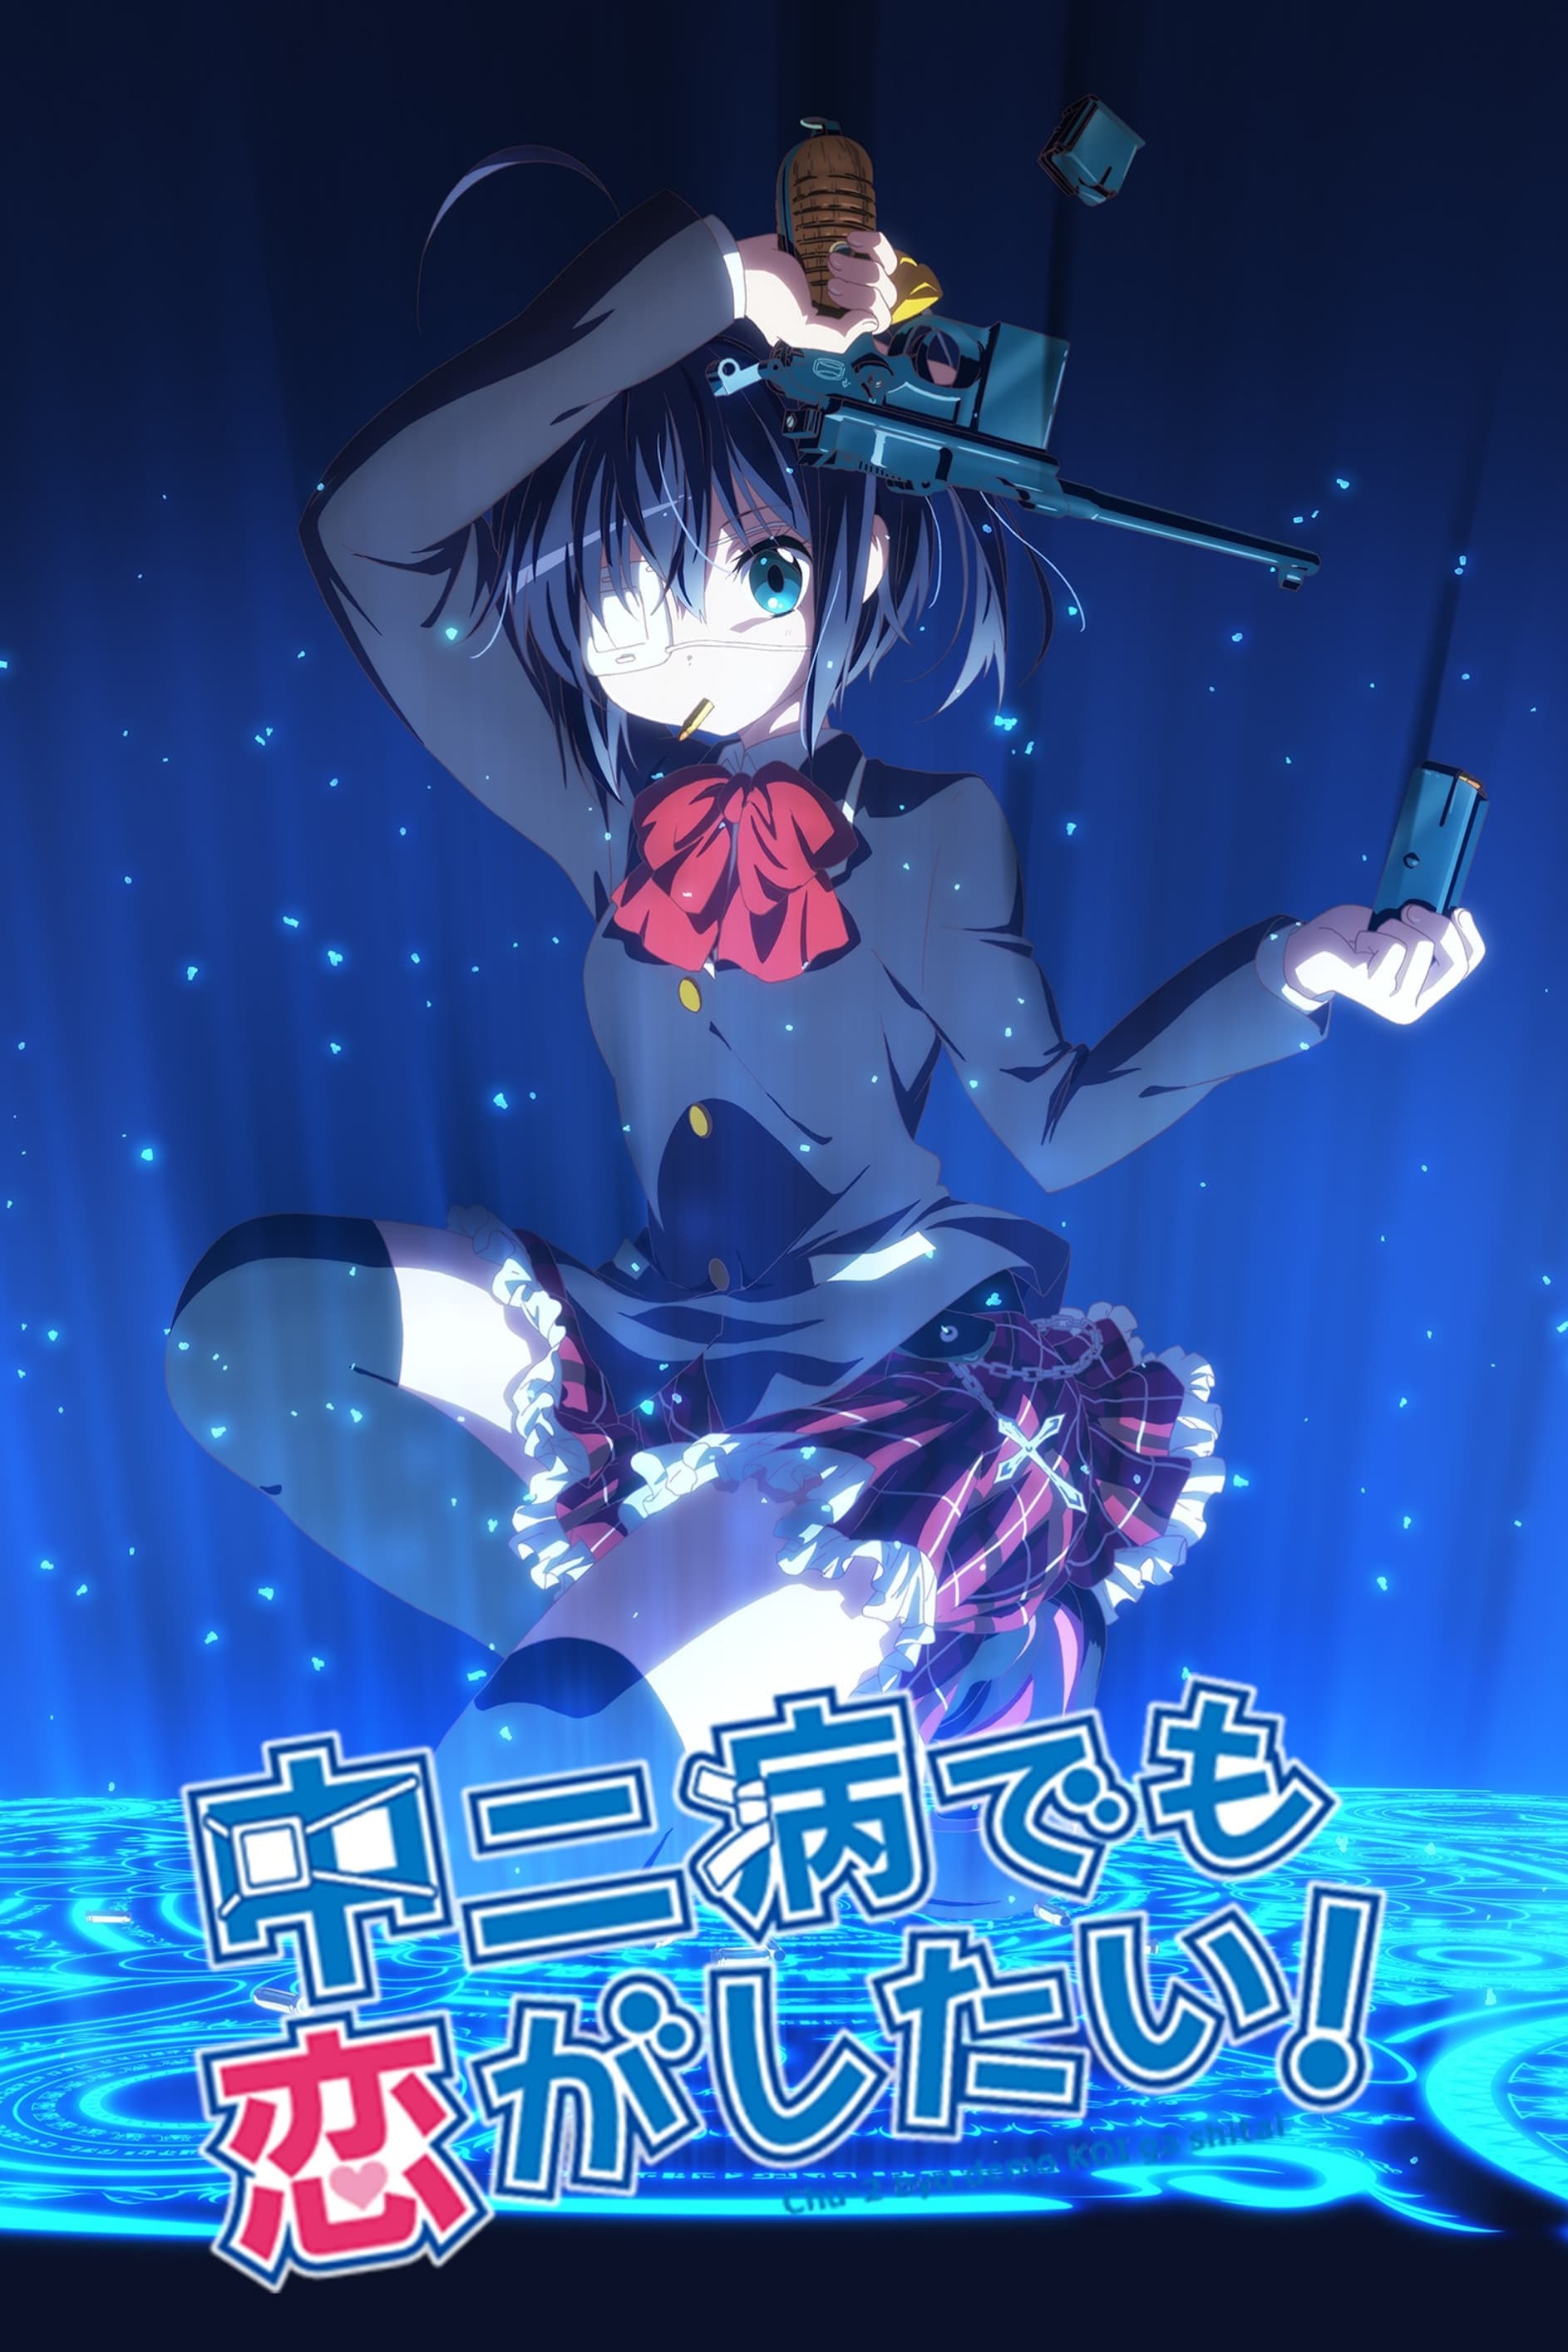 Love, Chunibyo & Other Delusions !